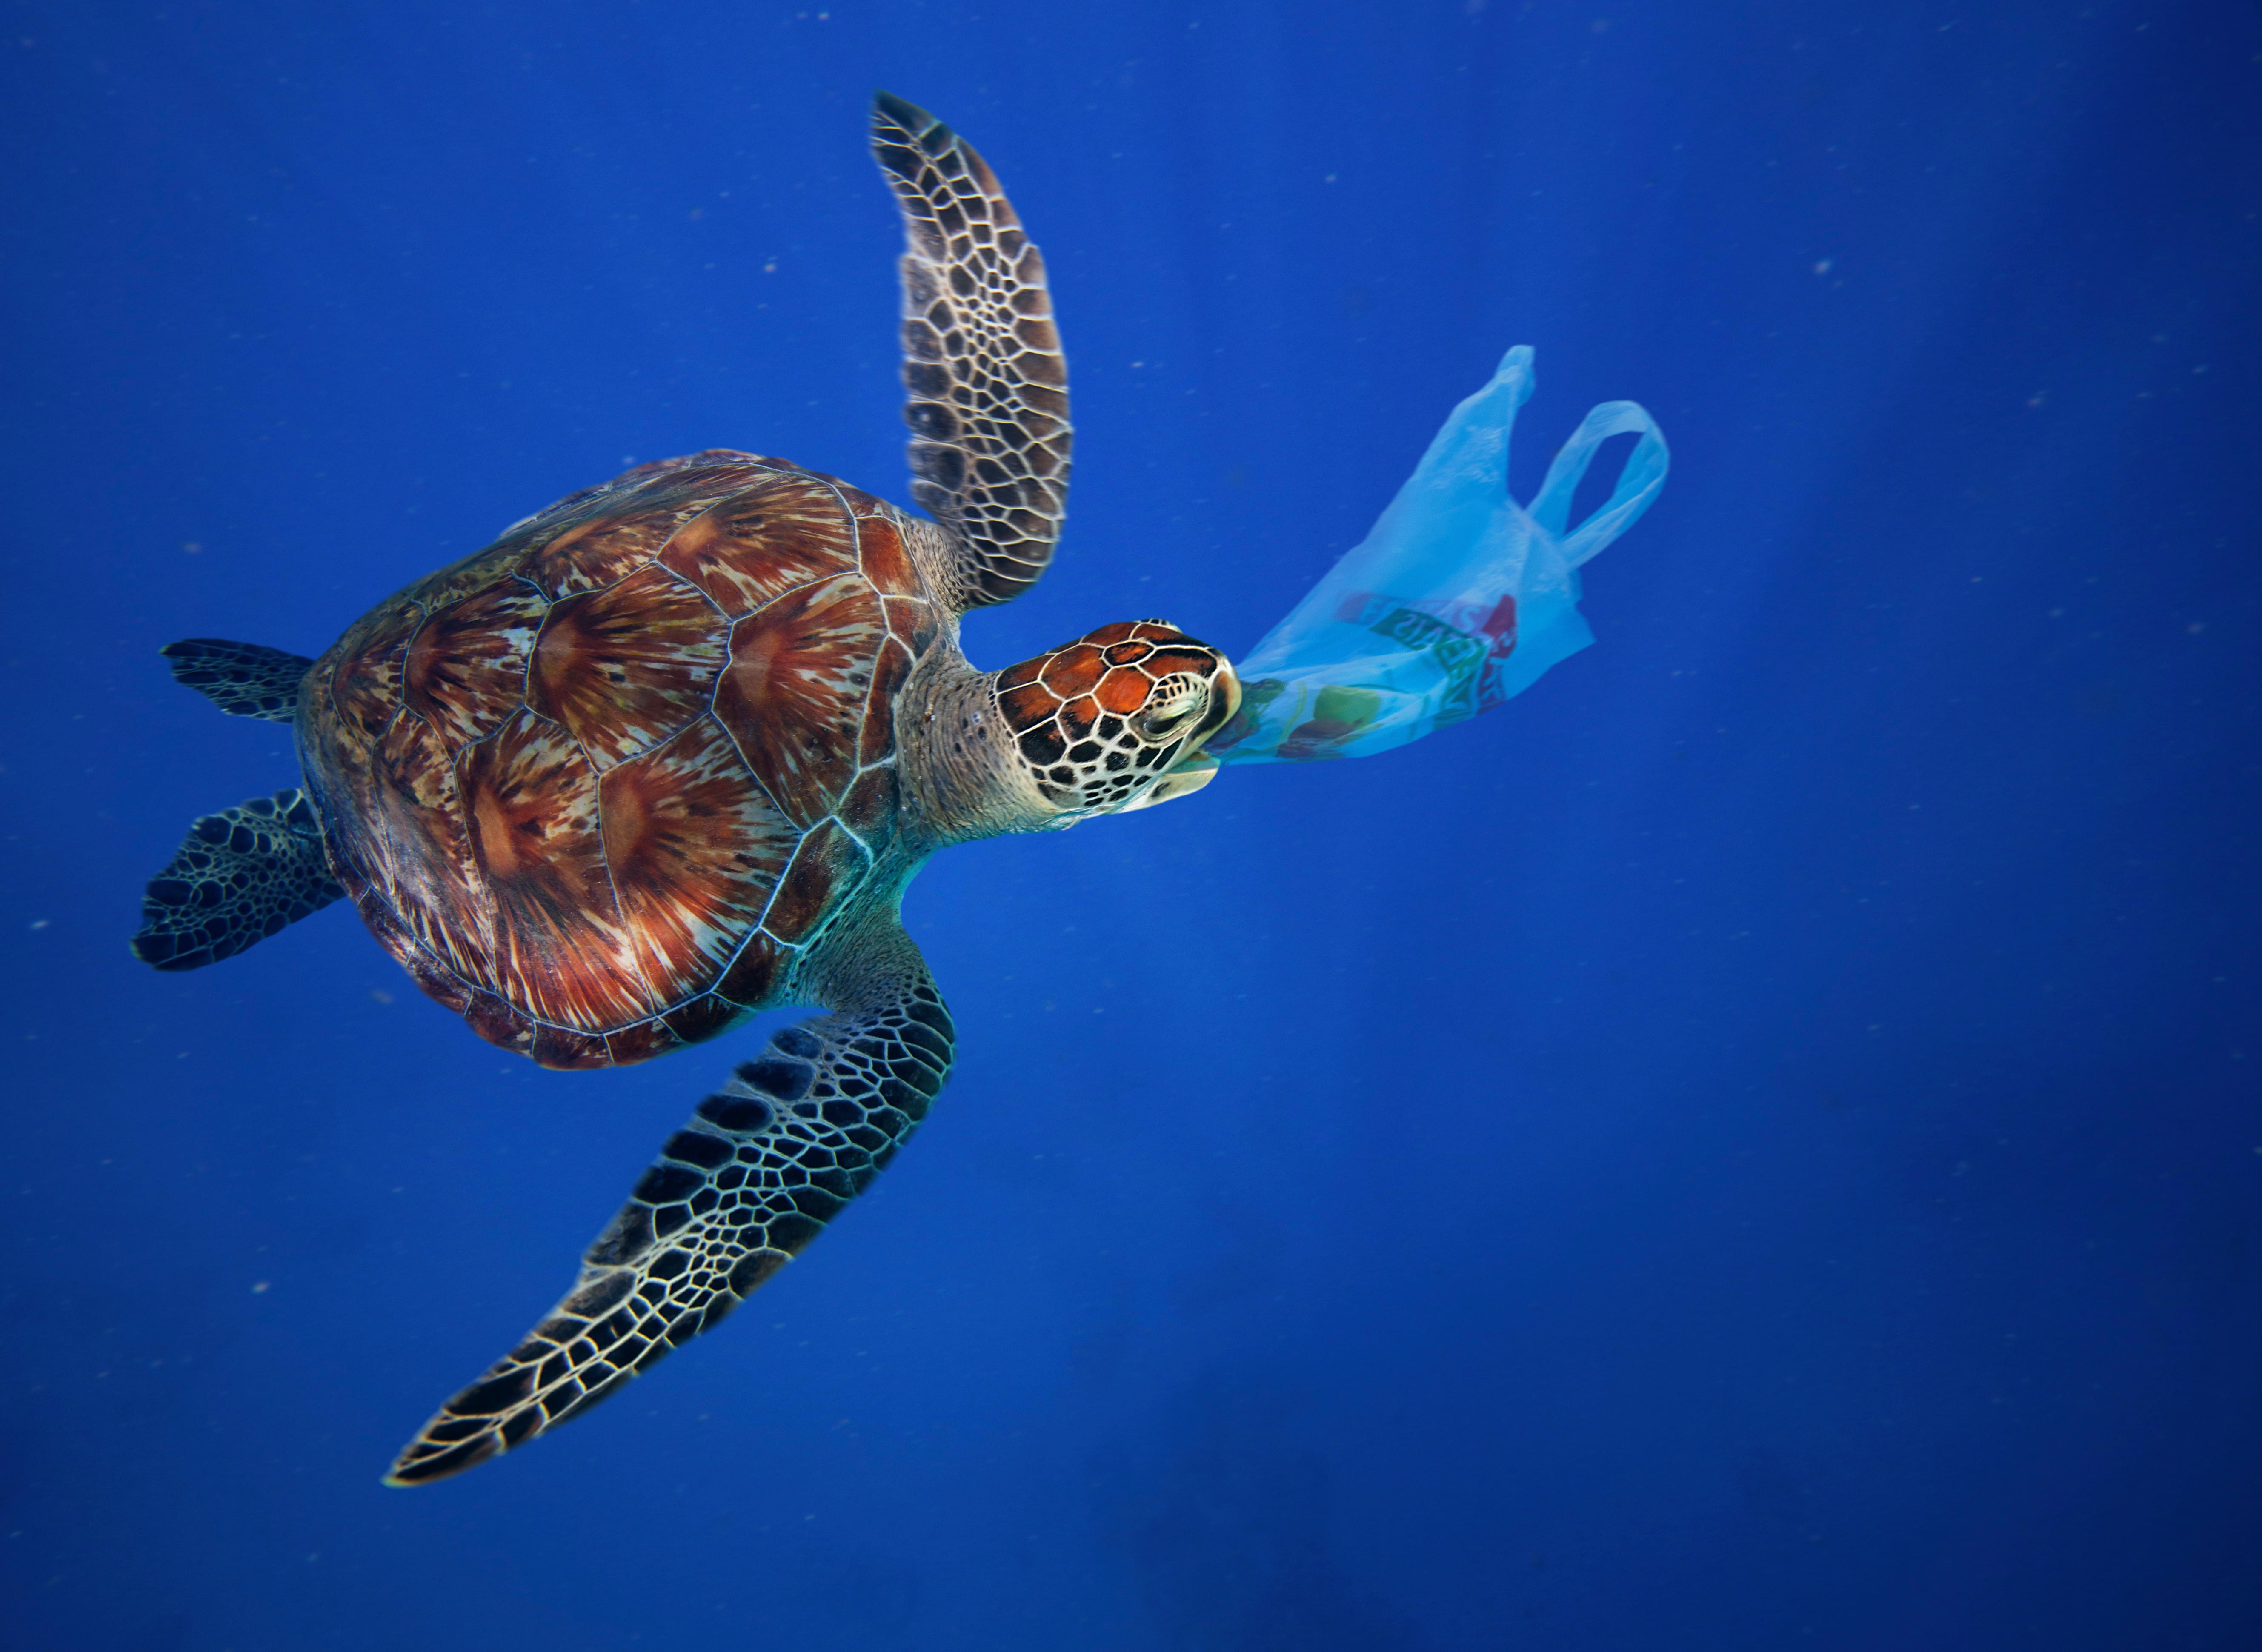 A sea turtle eating a plastic bag. Each year 100,000 marine mammals die from eating plastic, global conservation body WWF says. Some travel businesses are reducing their use of plastic bags and other plastic items. Photo: Alamy